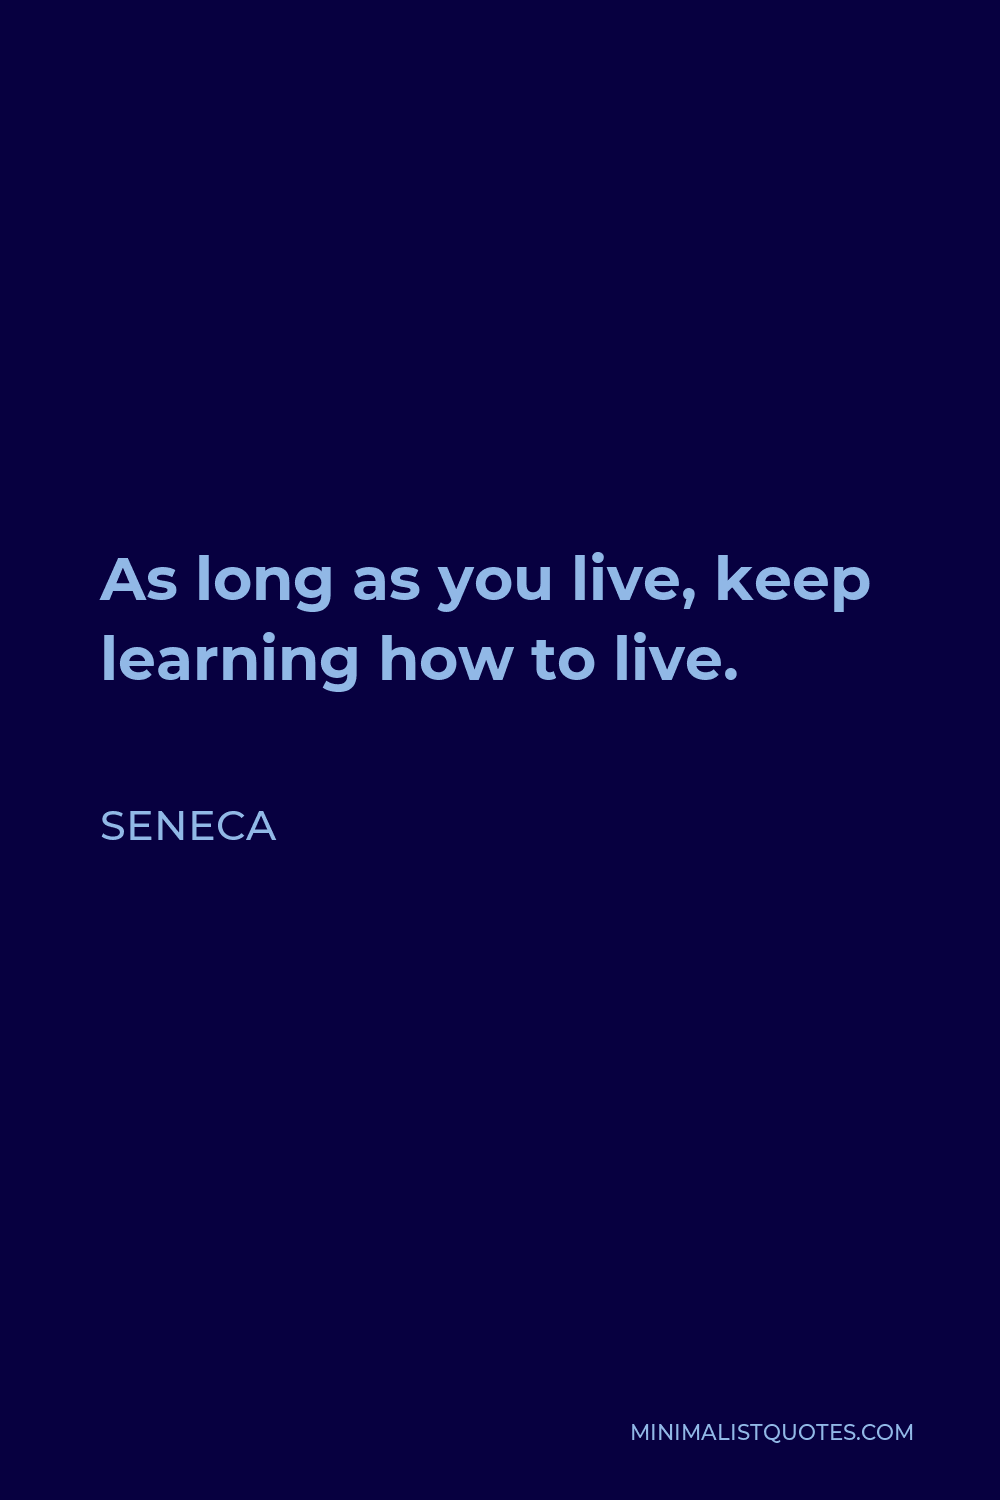 Seneca Quote - As long as you live, keep learning how to live.